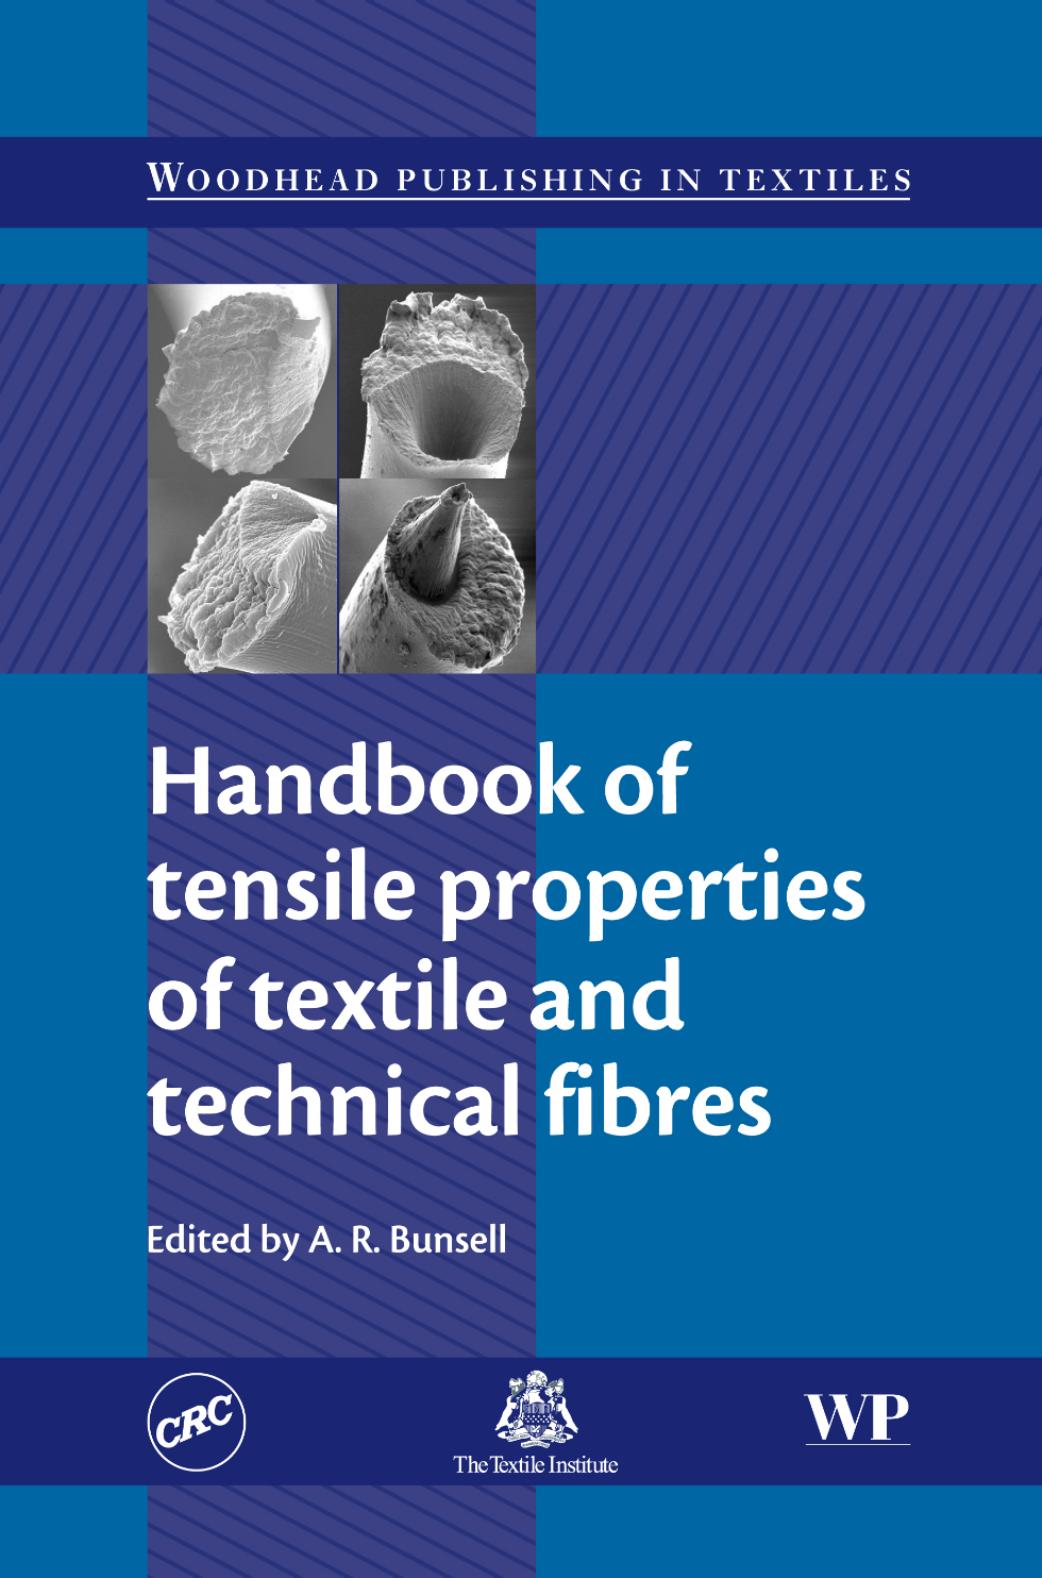 Handbook of Tensile Properties of Textile and Technical Fibres (Woodhead Publishing Series in Textiles) 2009